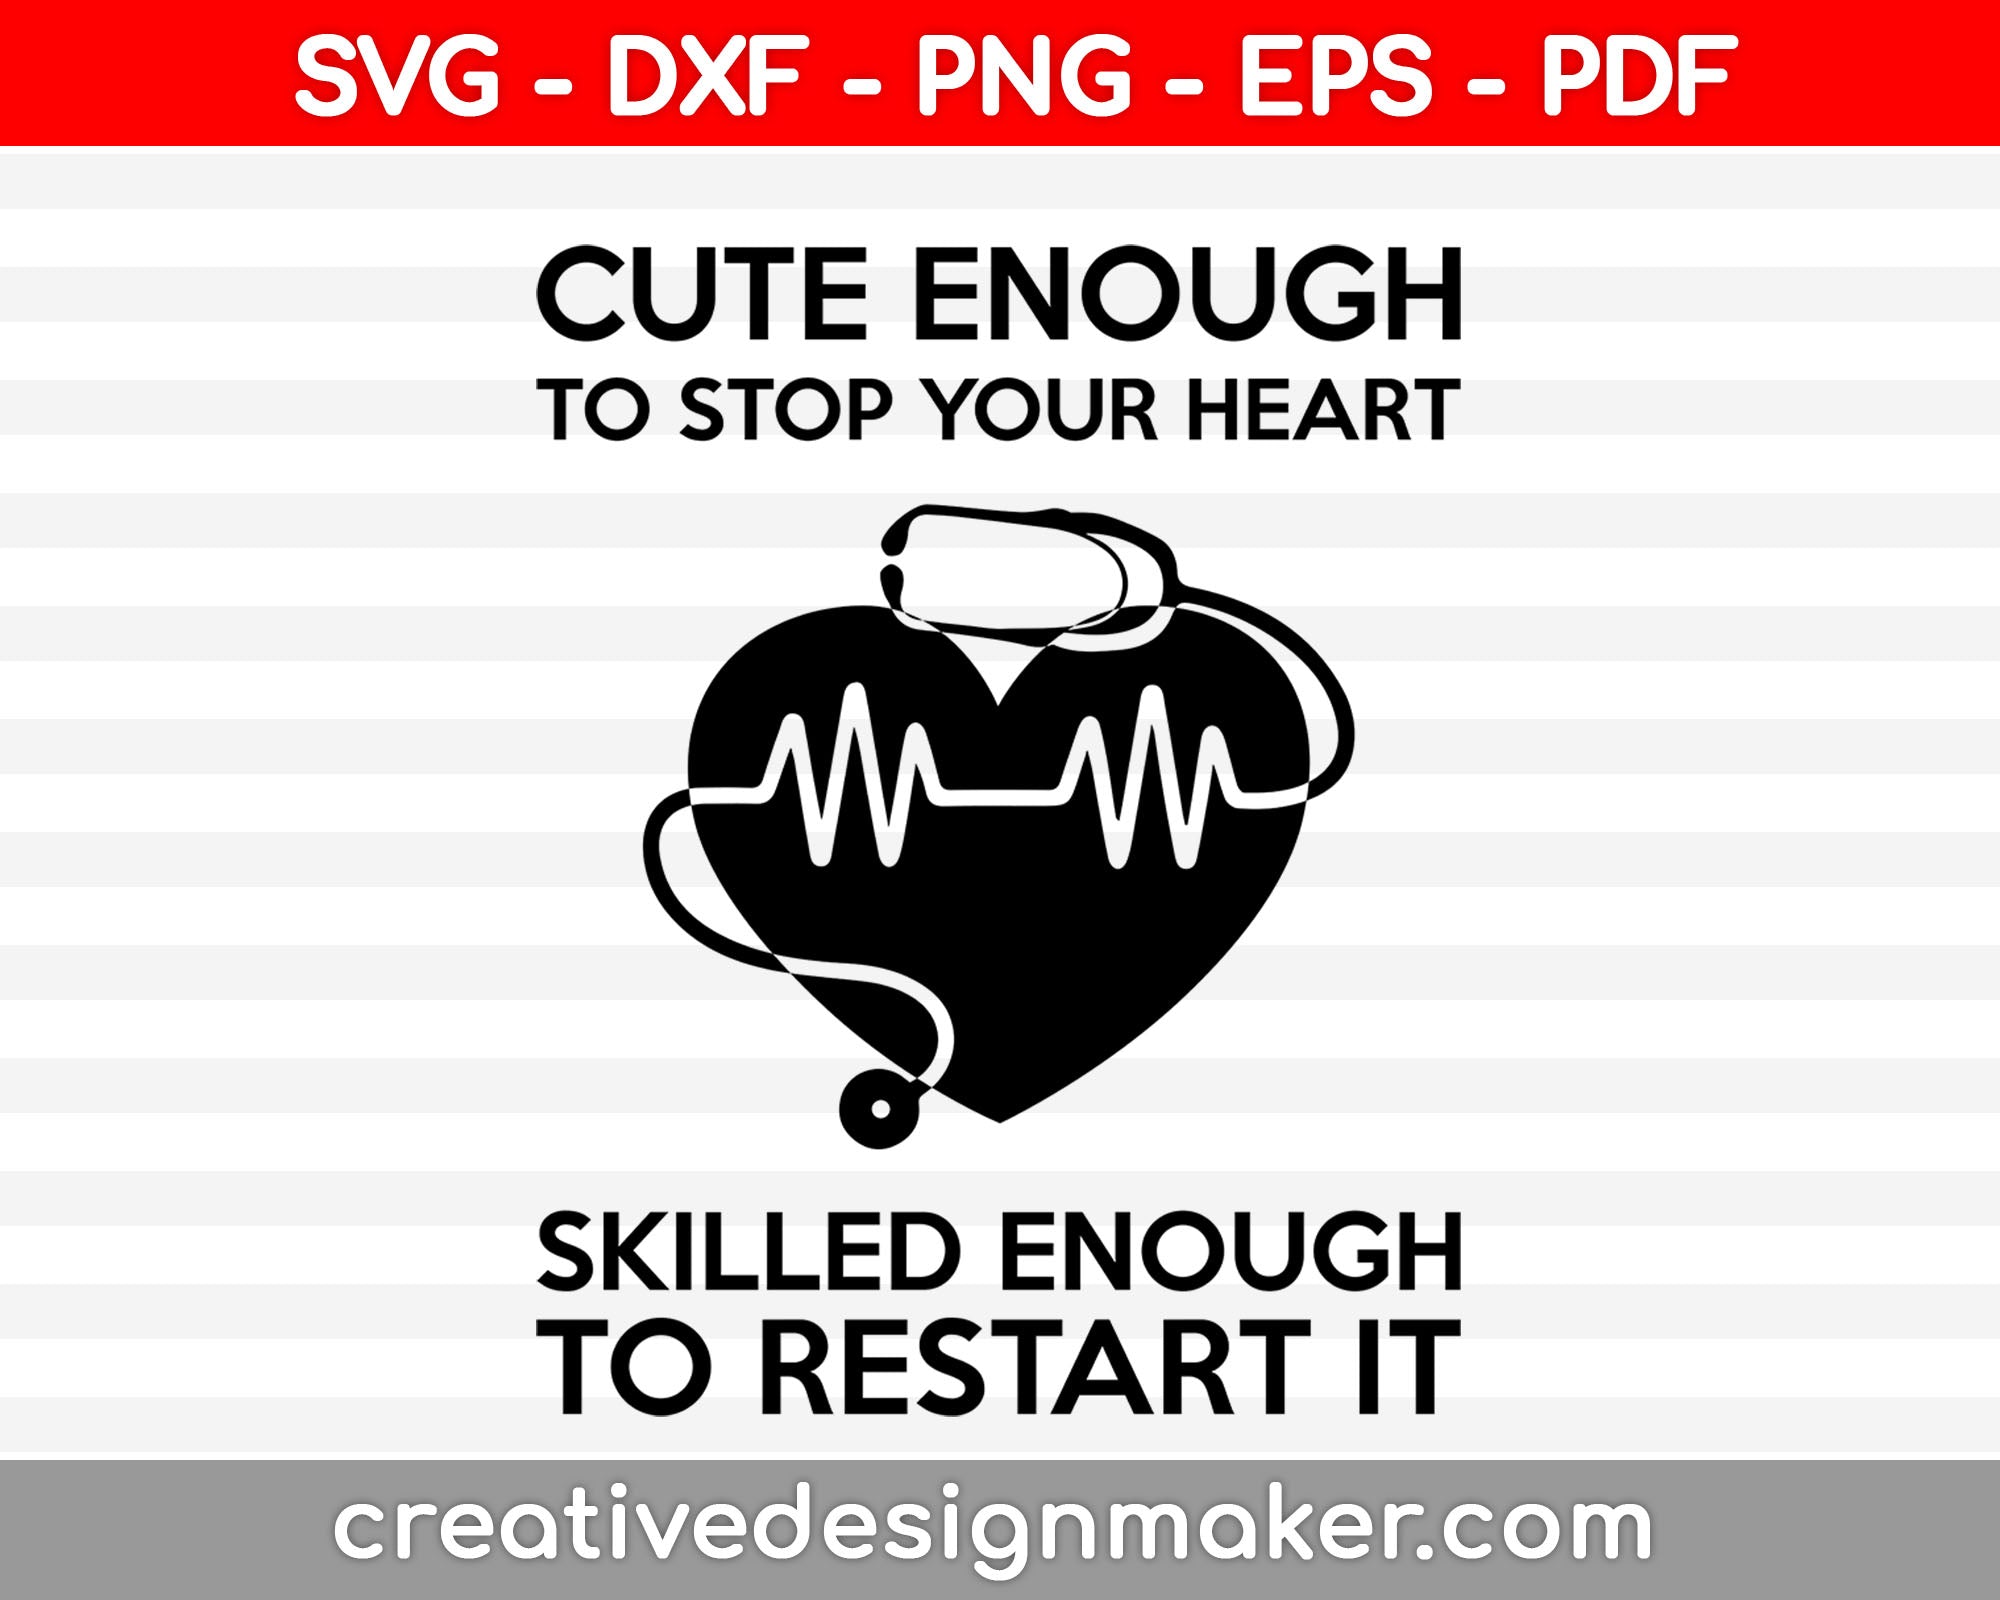 Cute Enough To Stop Your Heart Skilled Enough To Restart It Funny Nurse Quotes Svg Dxf Png Eps Pdf Printable Files